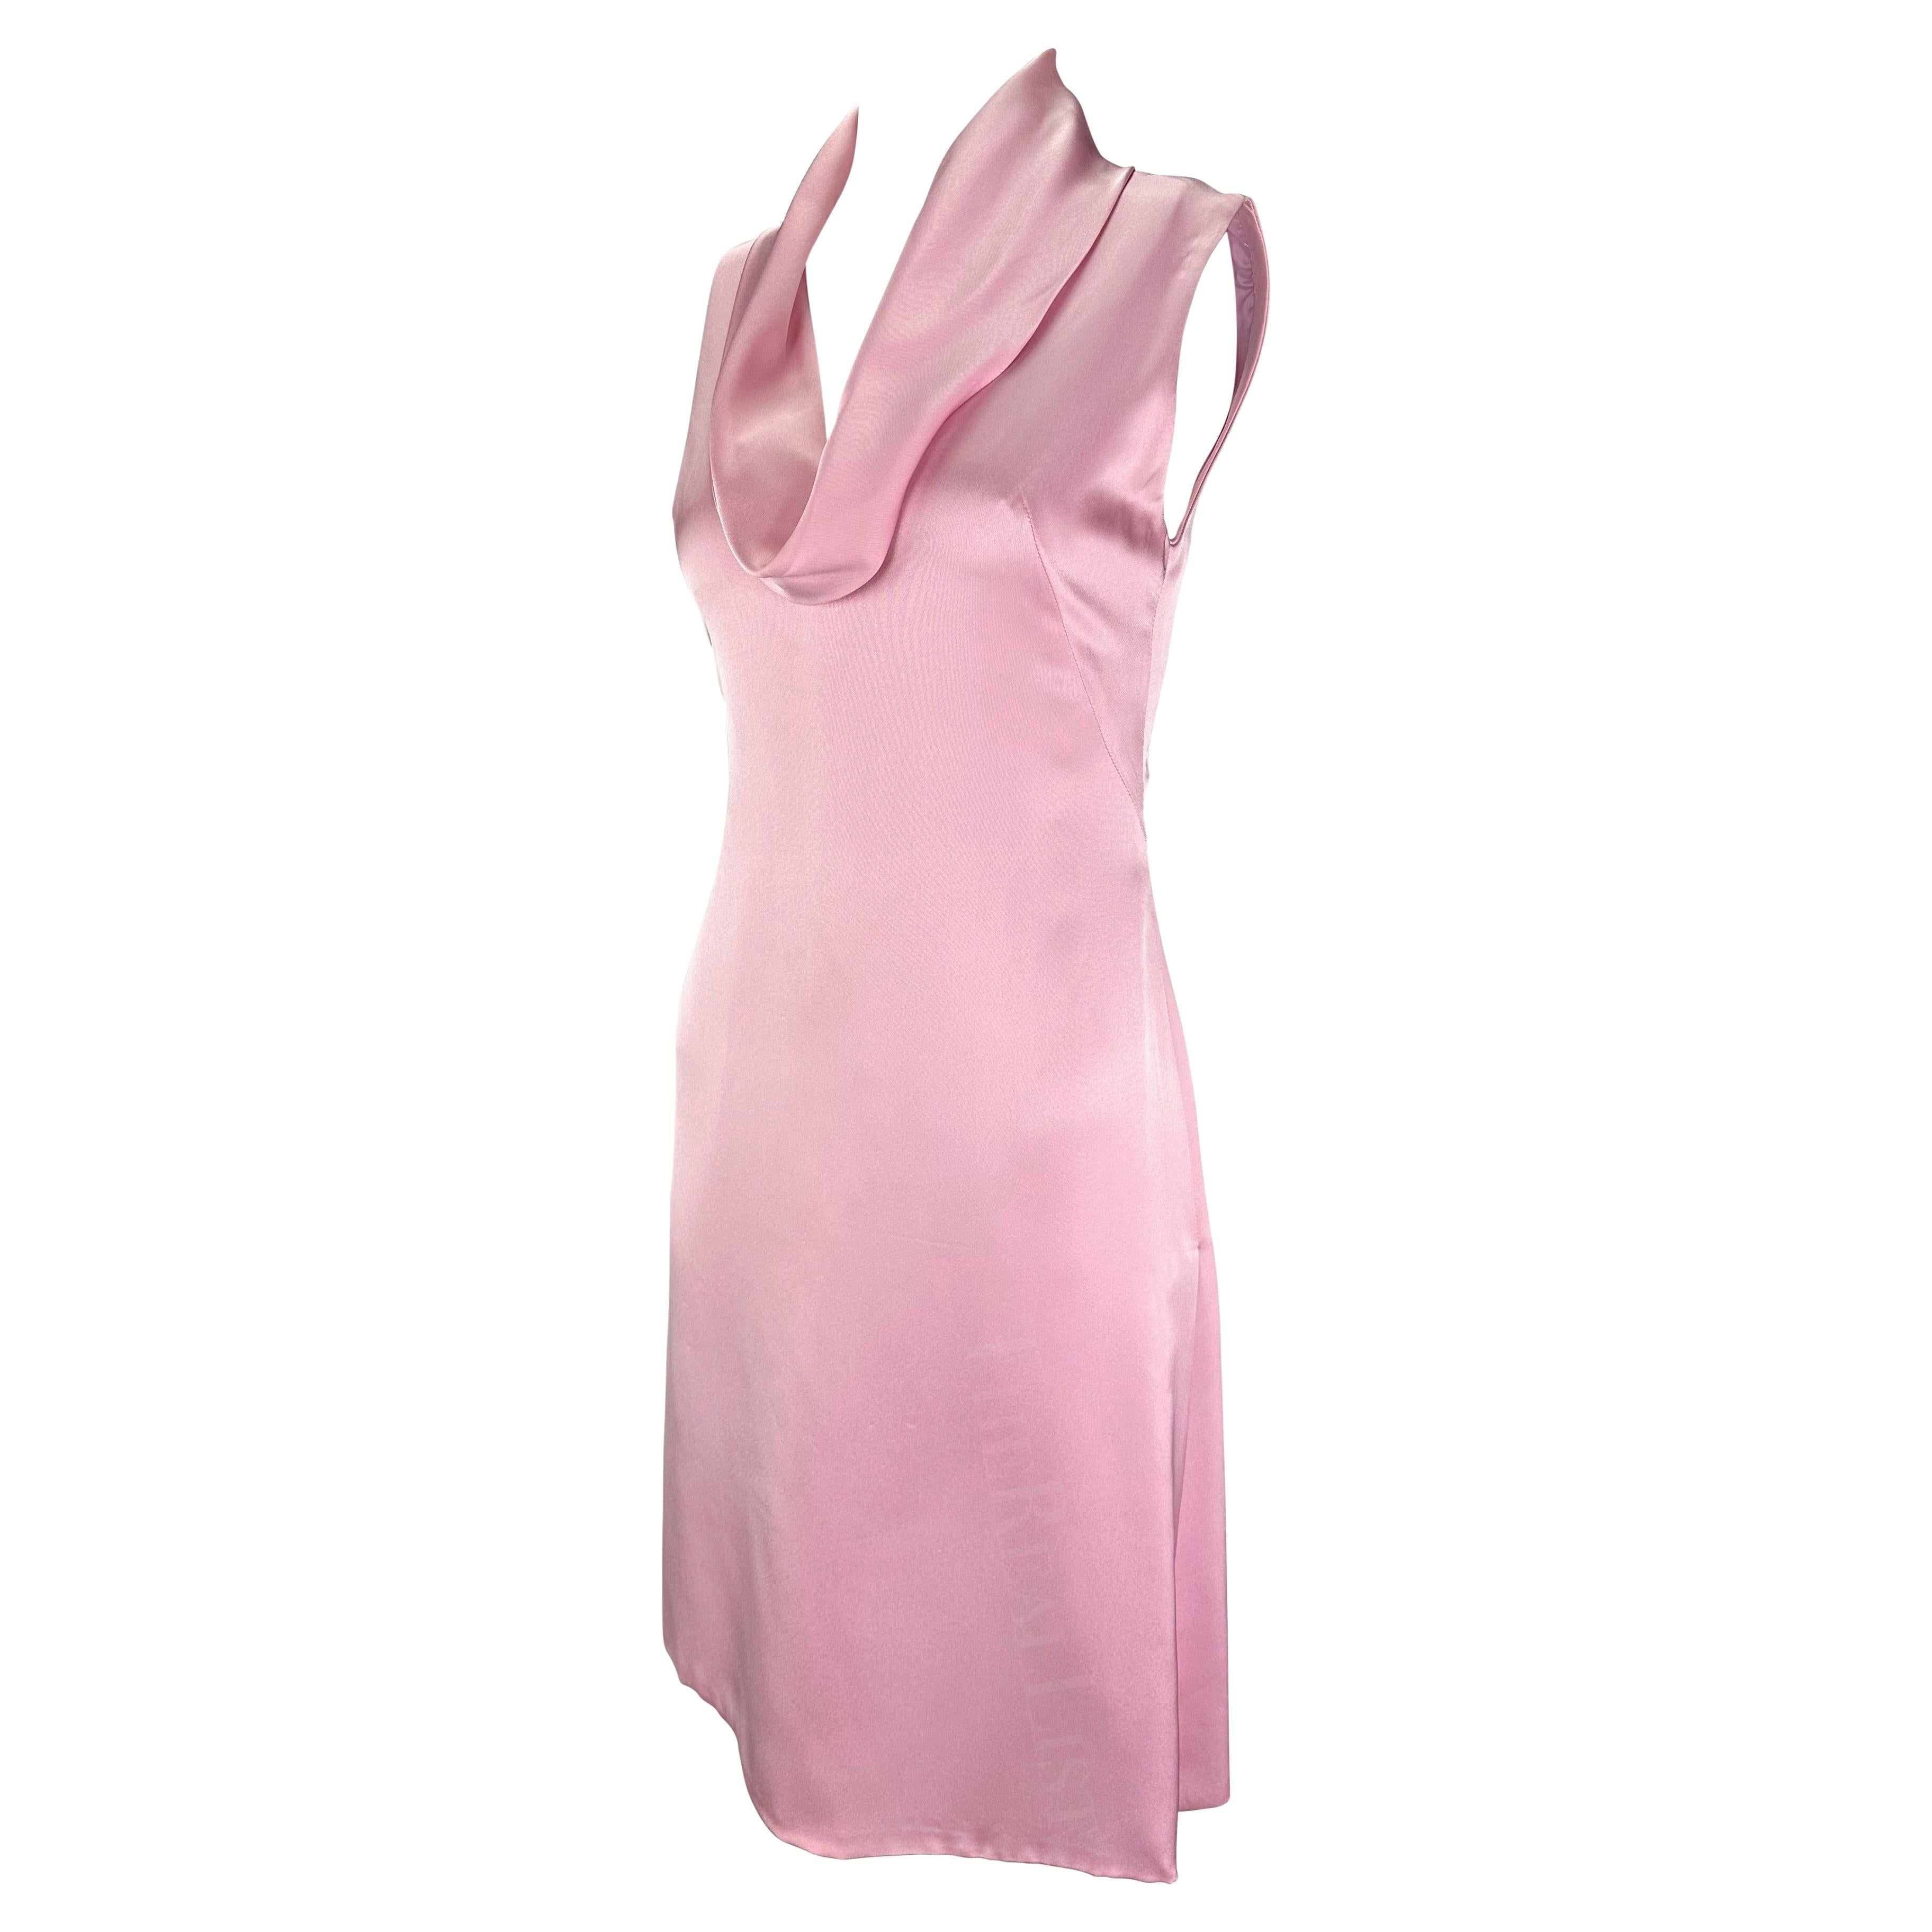 Presenting a gorgeous light pink Gianni Versace mini dress, designed by Donatella Versace. From the early 2000s, this pastel pink dress enchants with its delicate hue and shines with the luxurious touch of silk satin. The sleeveless design and